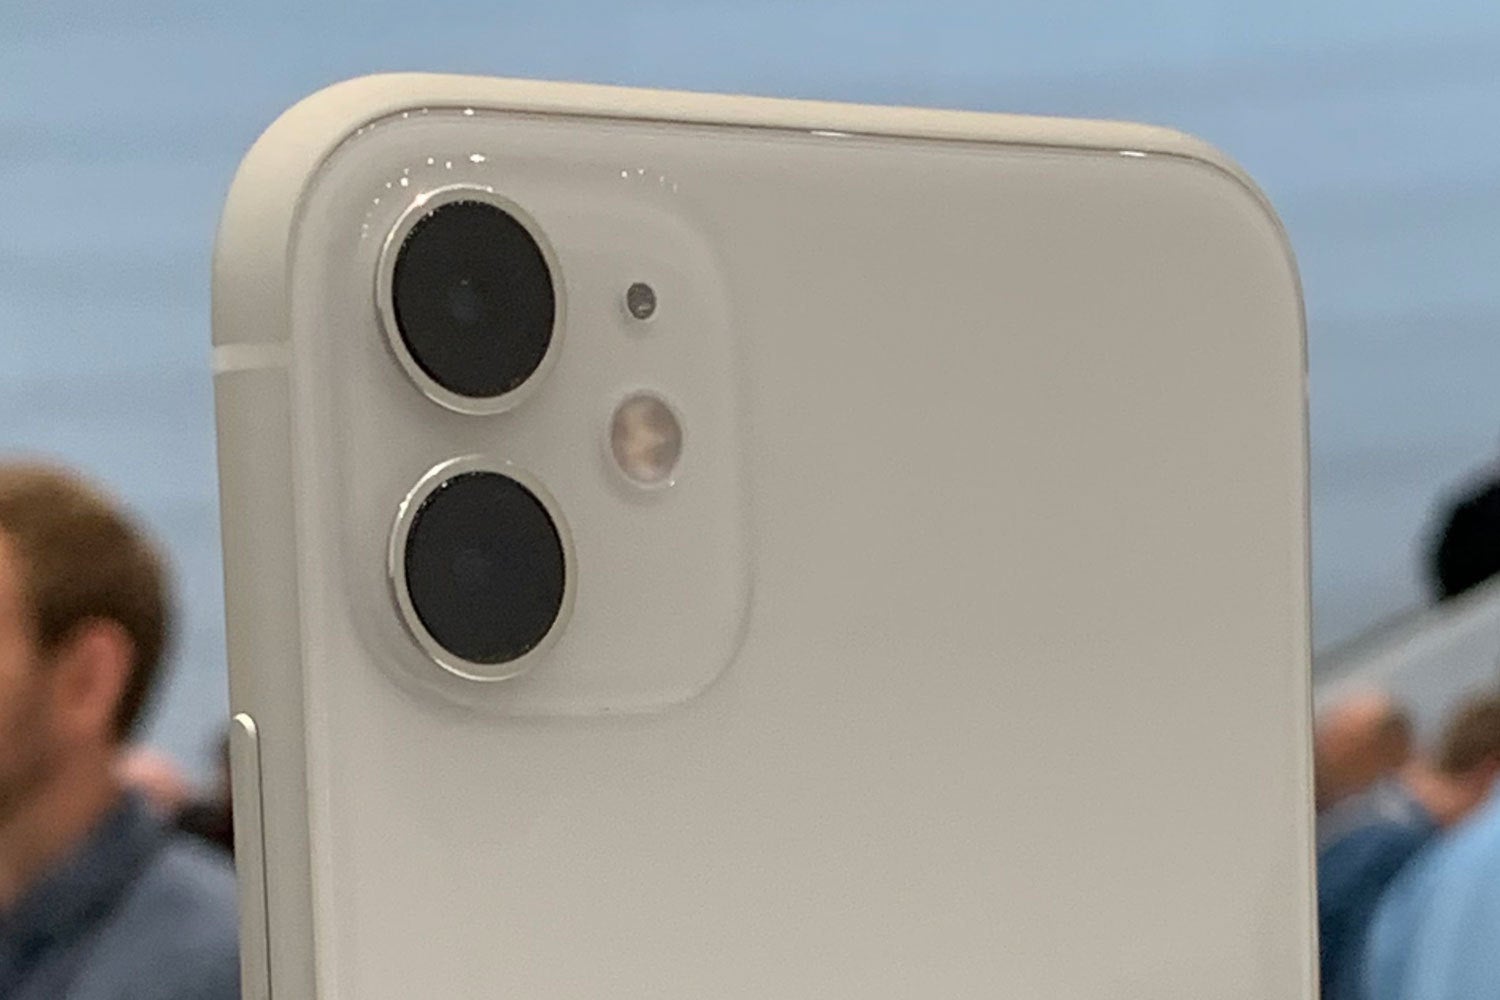 Hands on with the iPhone 11 cameras UniverSmartphone